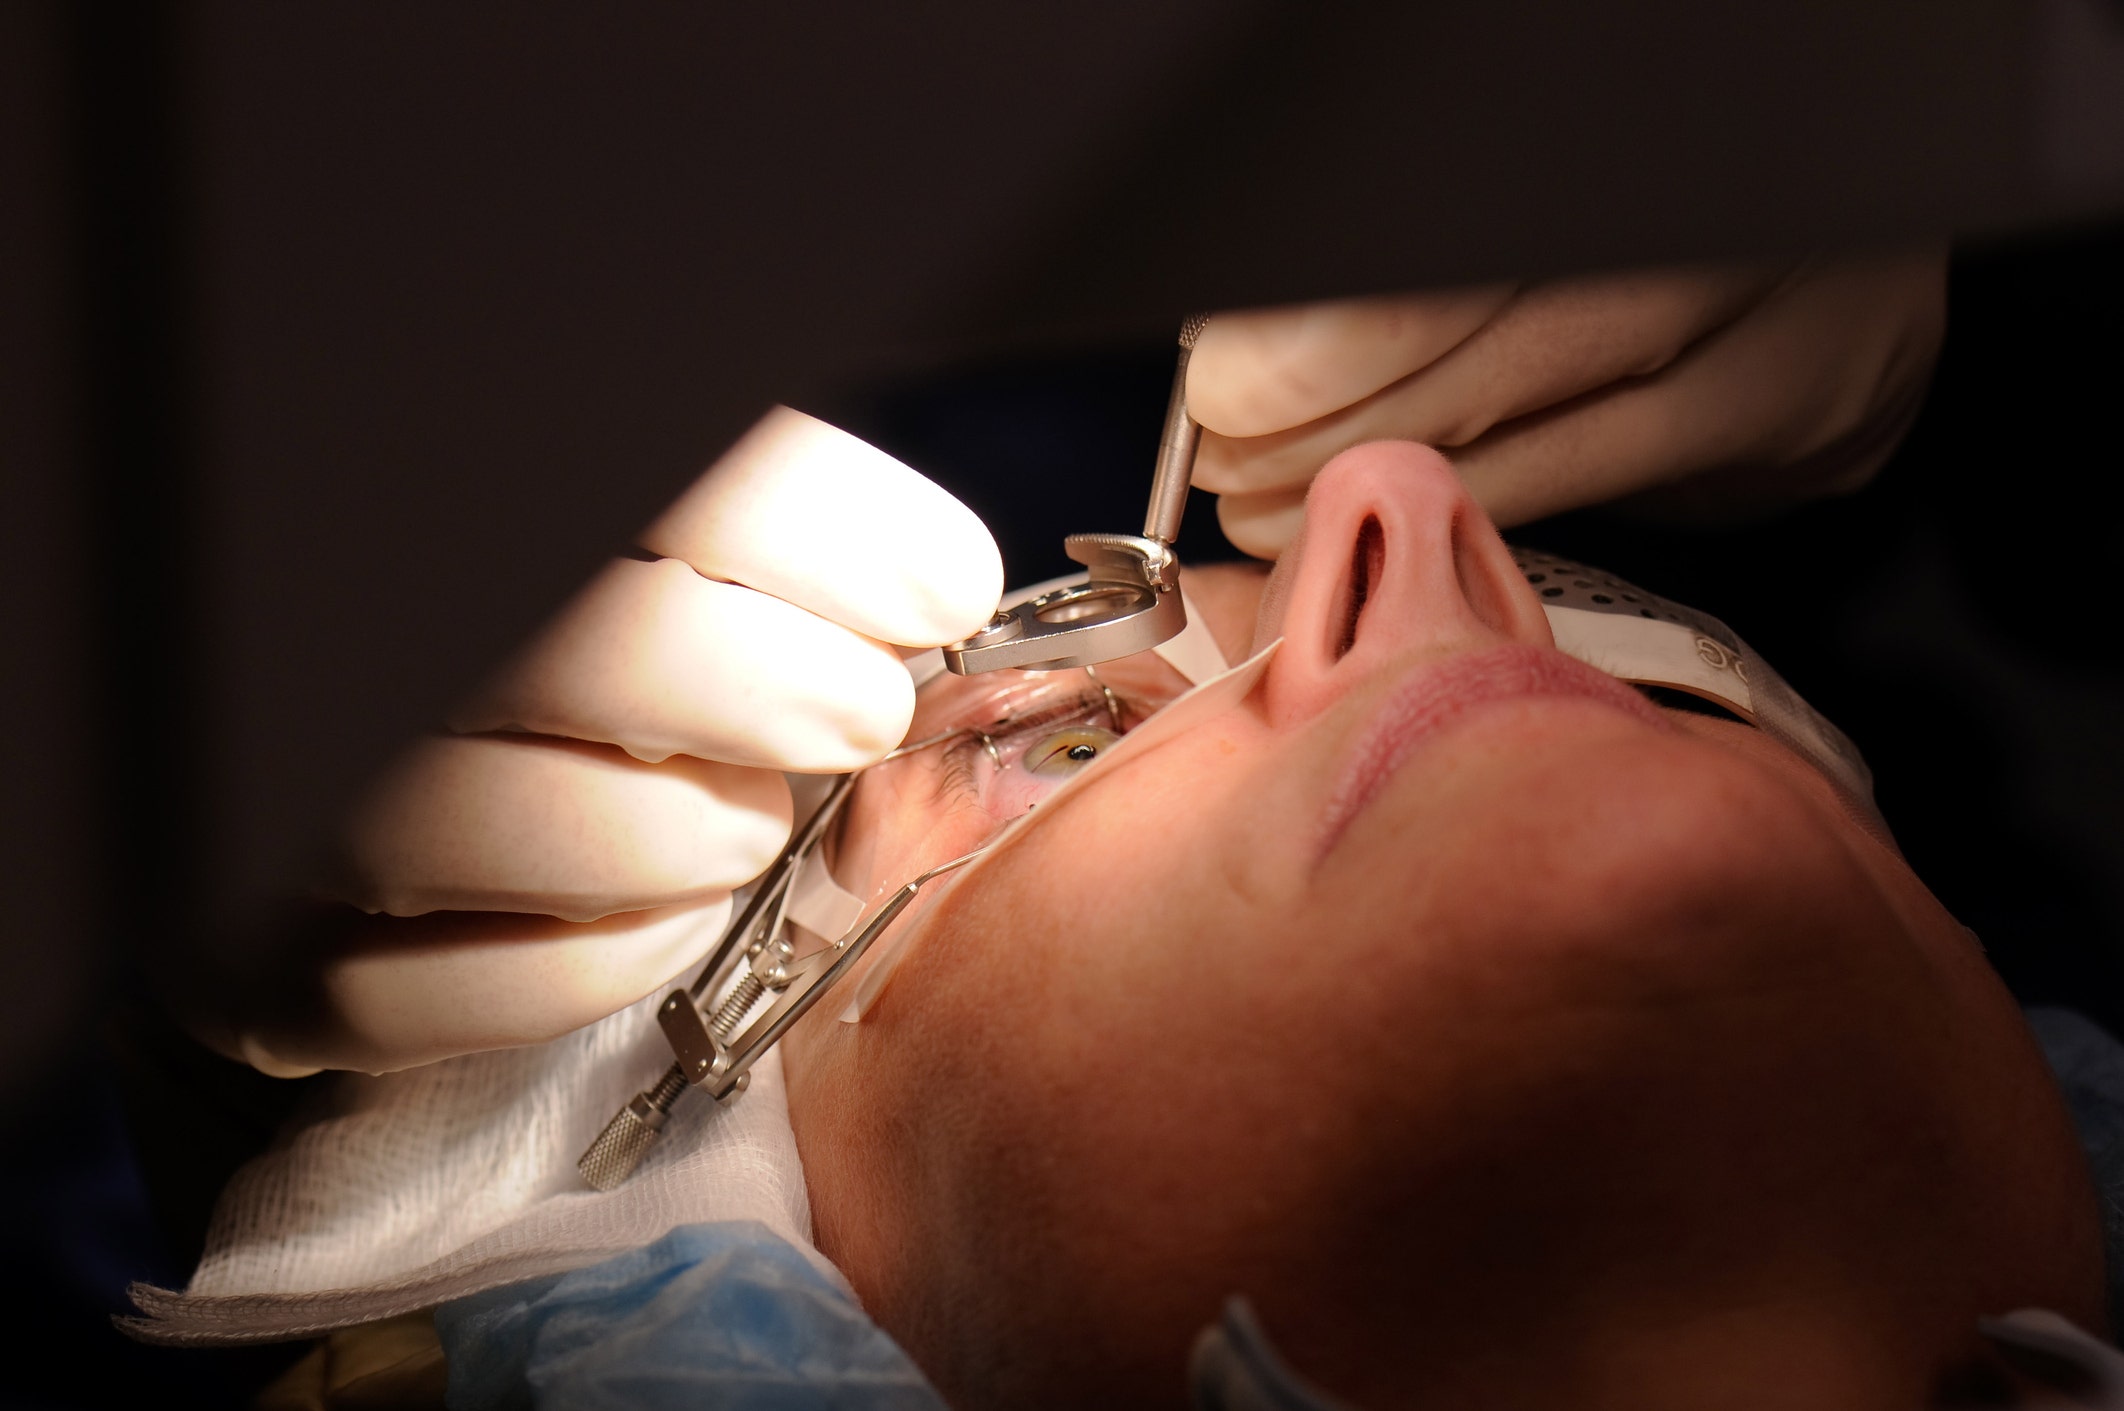 FDA warns that LASIK surgery patients need to be better informed of risks before eye procedure